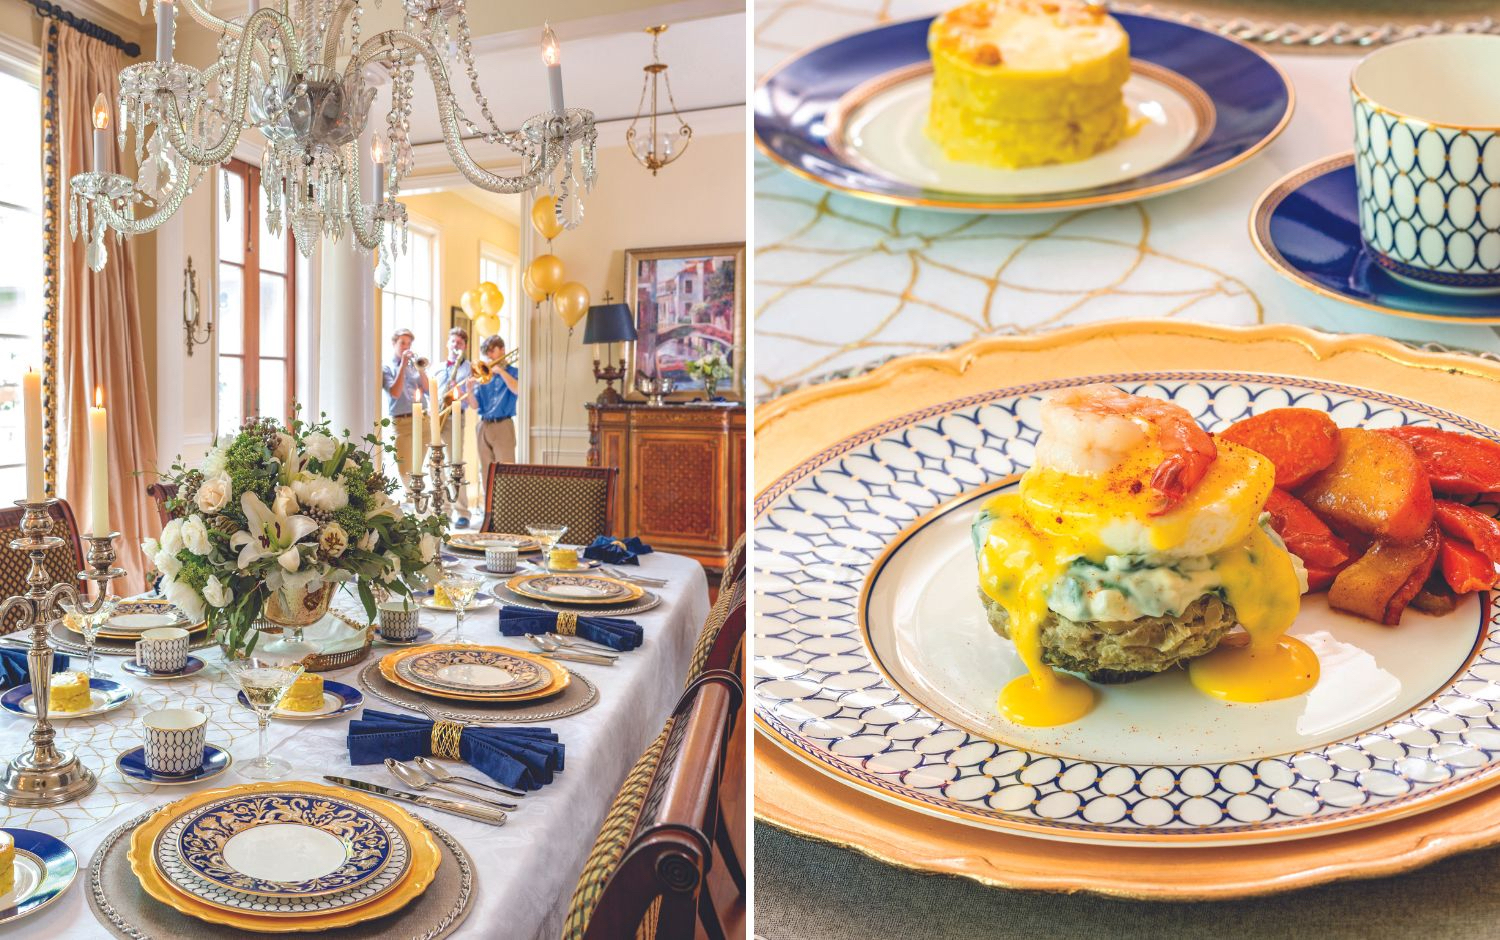 Host a New Orleans-Style Jazz Brunch